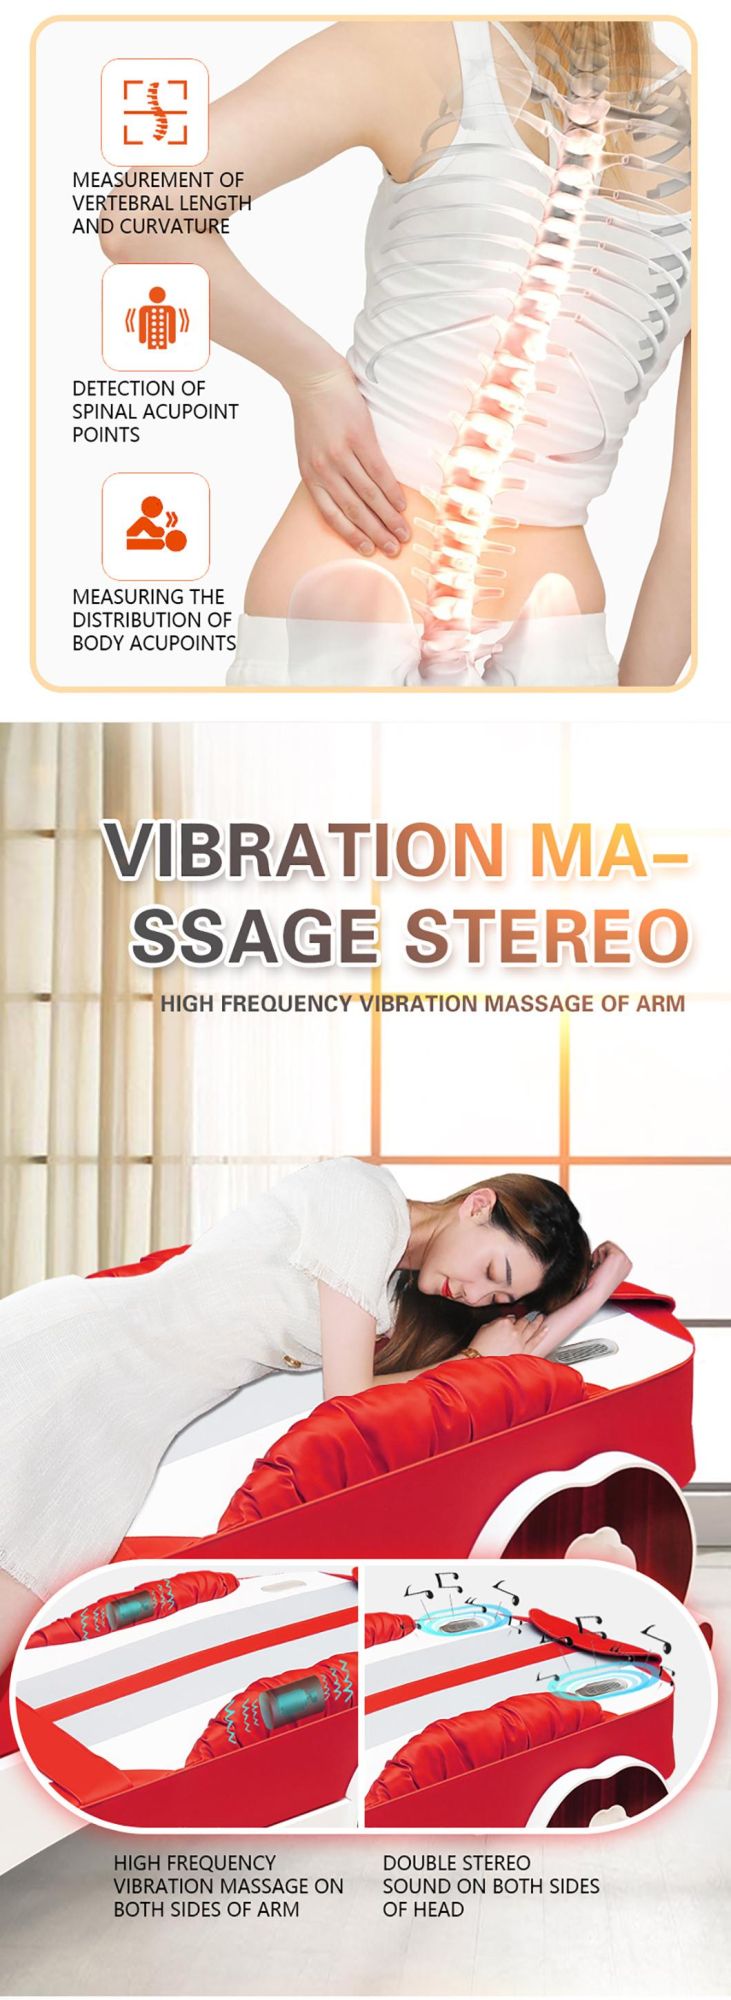 2019 Hot Selling Infrared Thermal Jade Massage Be